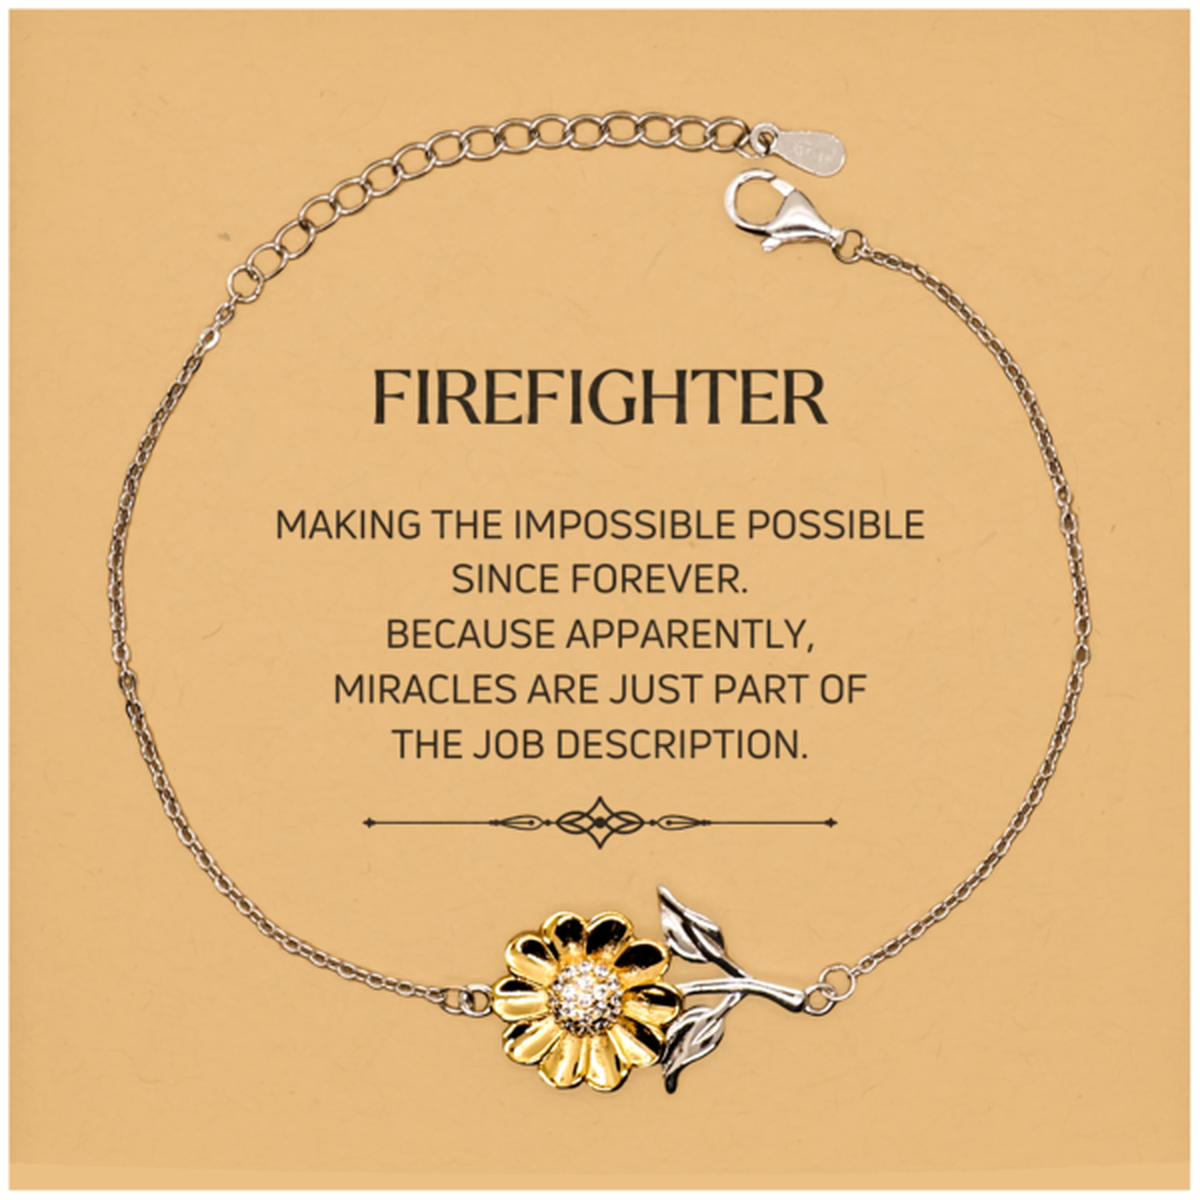 Funny Firefighter Gifts, Miracles are just part of the job description, Inspirational Birthday Christmas Sunflower Bracelet For Firefighter, Men, Women, Coworkers, Friends, Boss